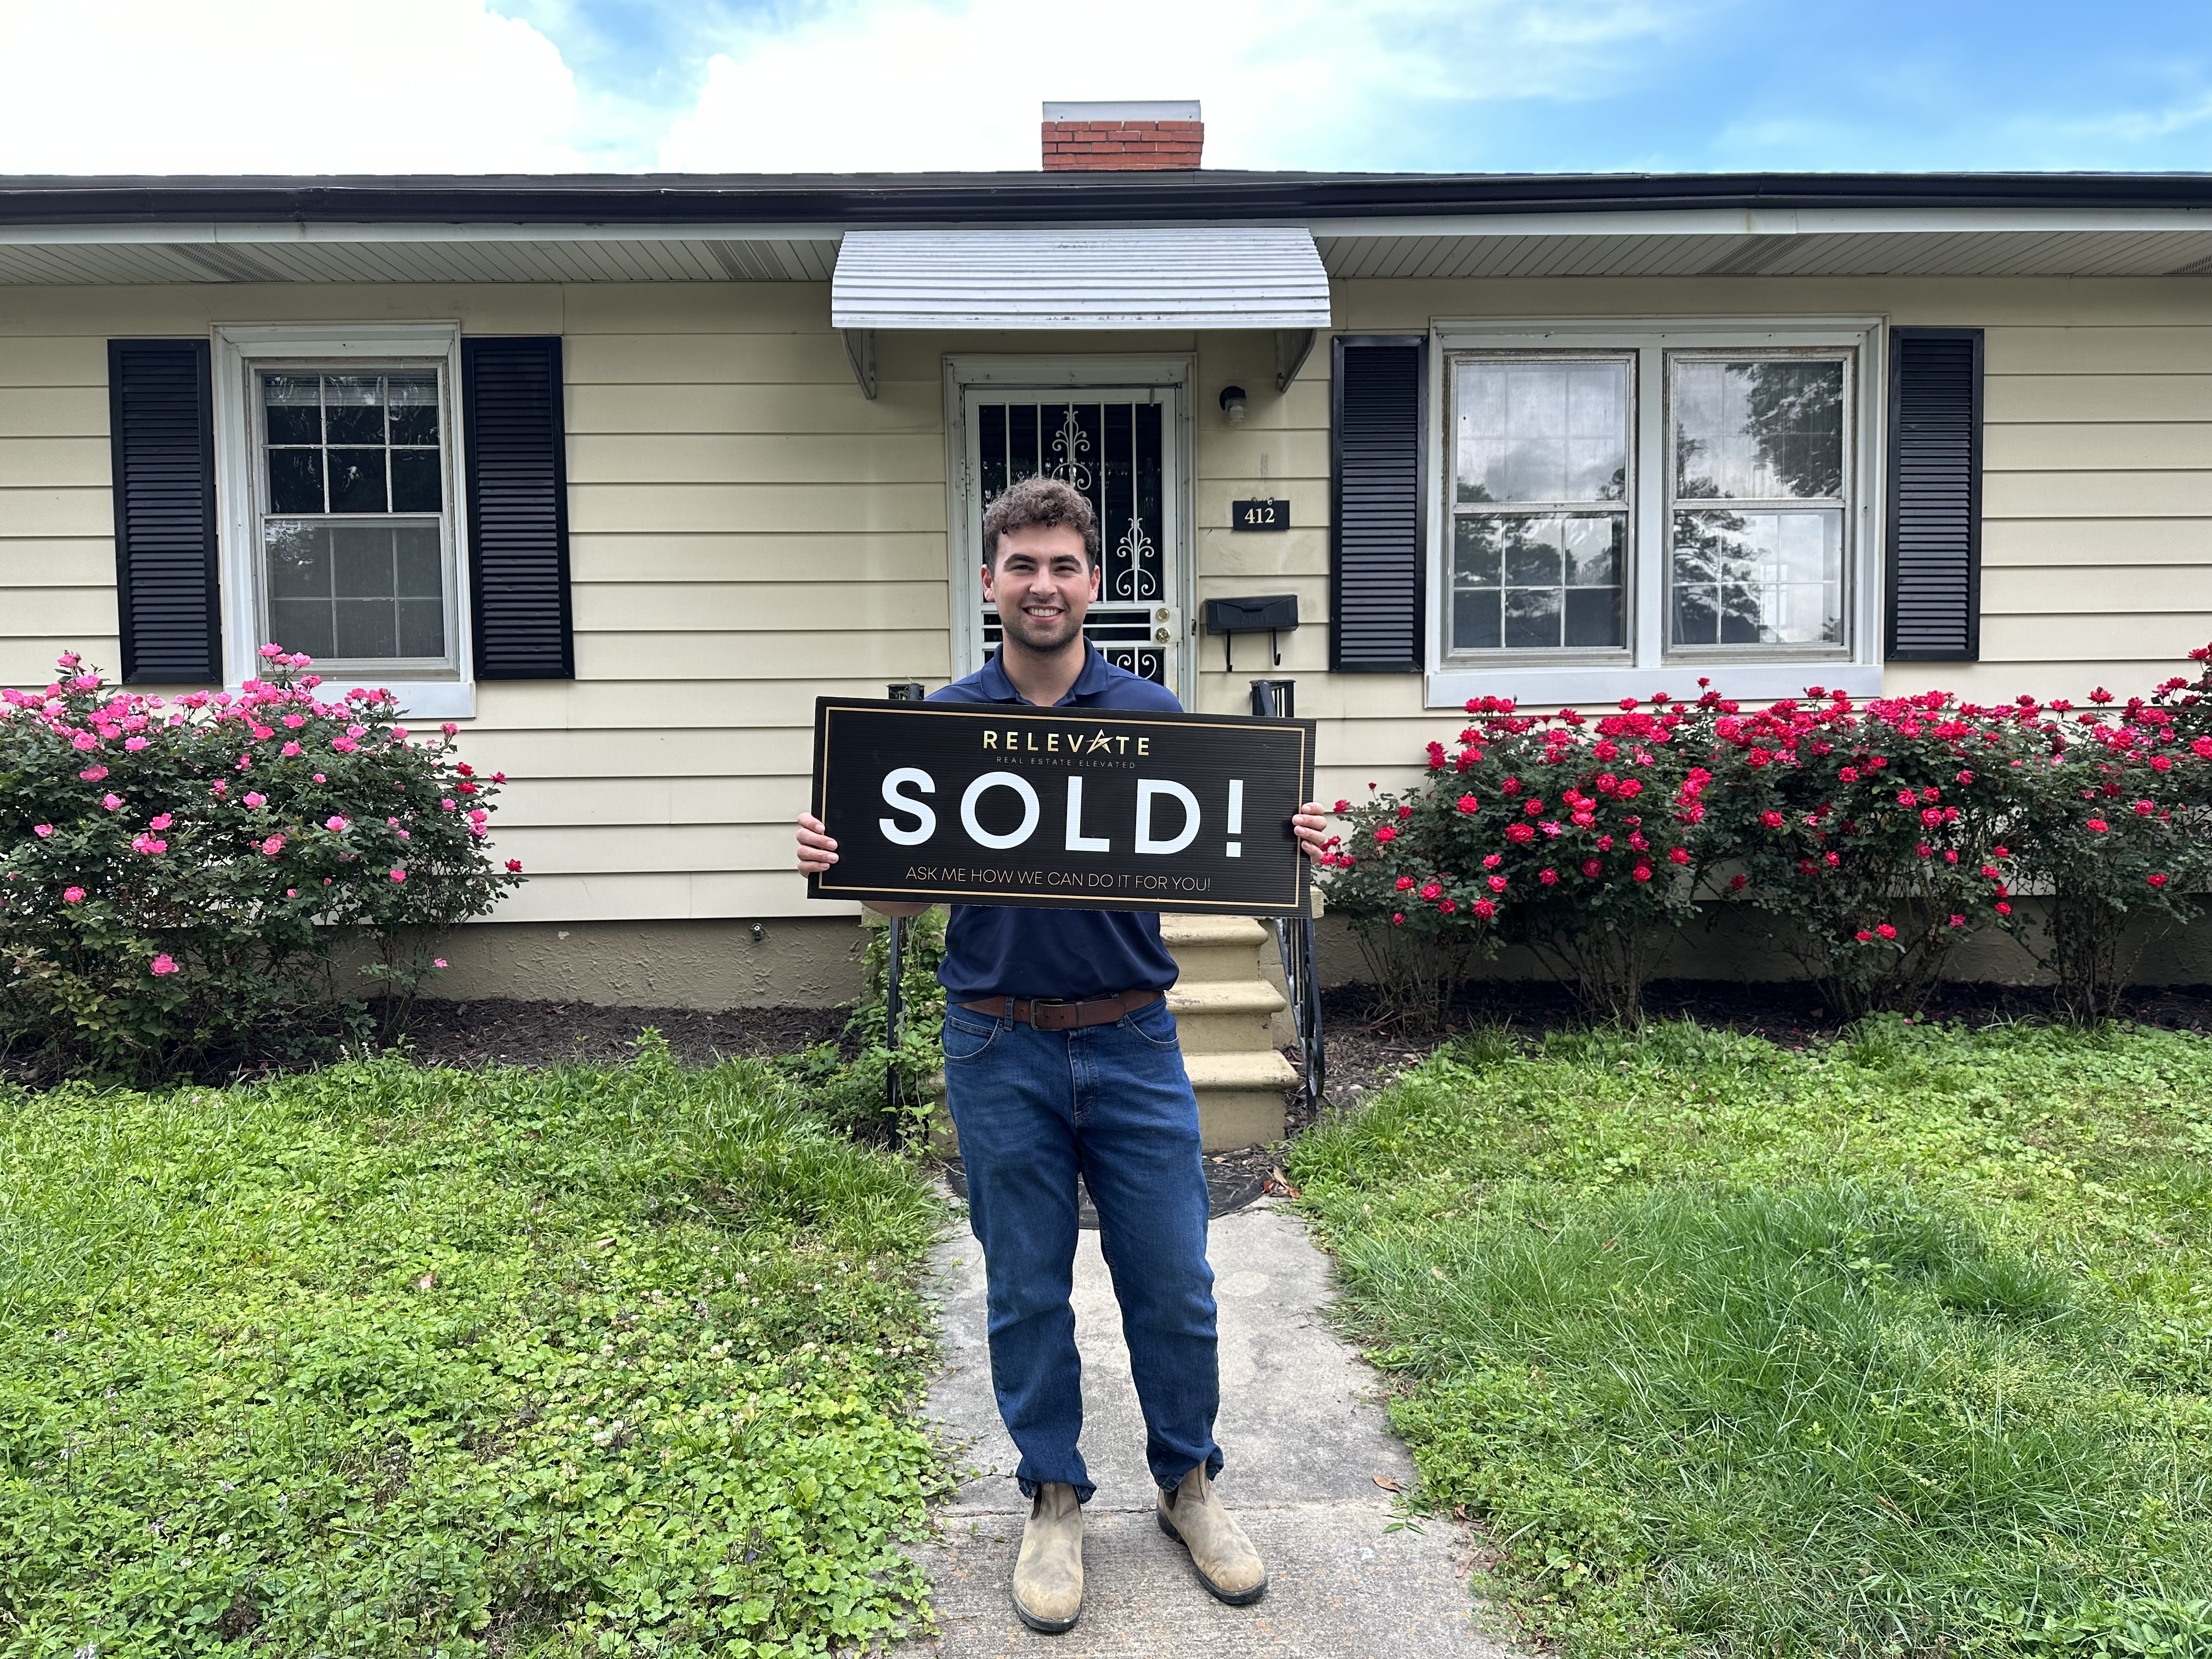 Satisfied homebuyer stands in front of home with SOLD sign